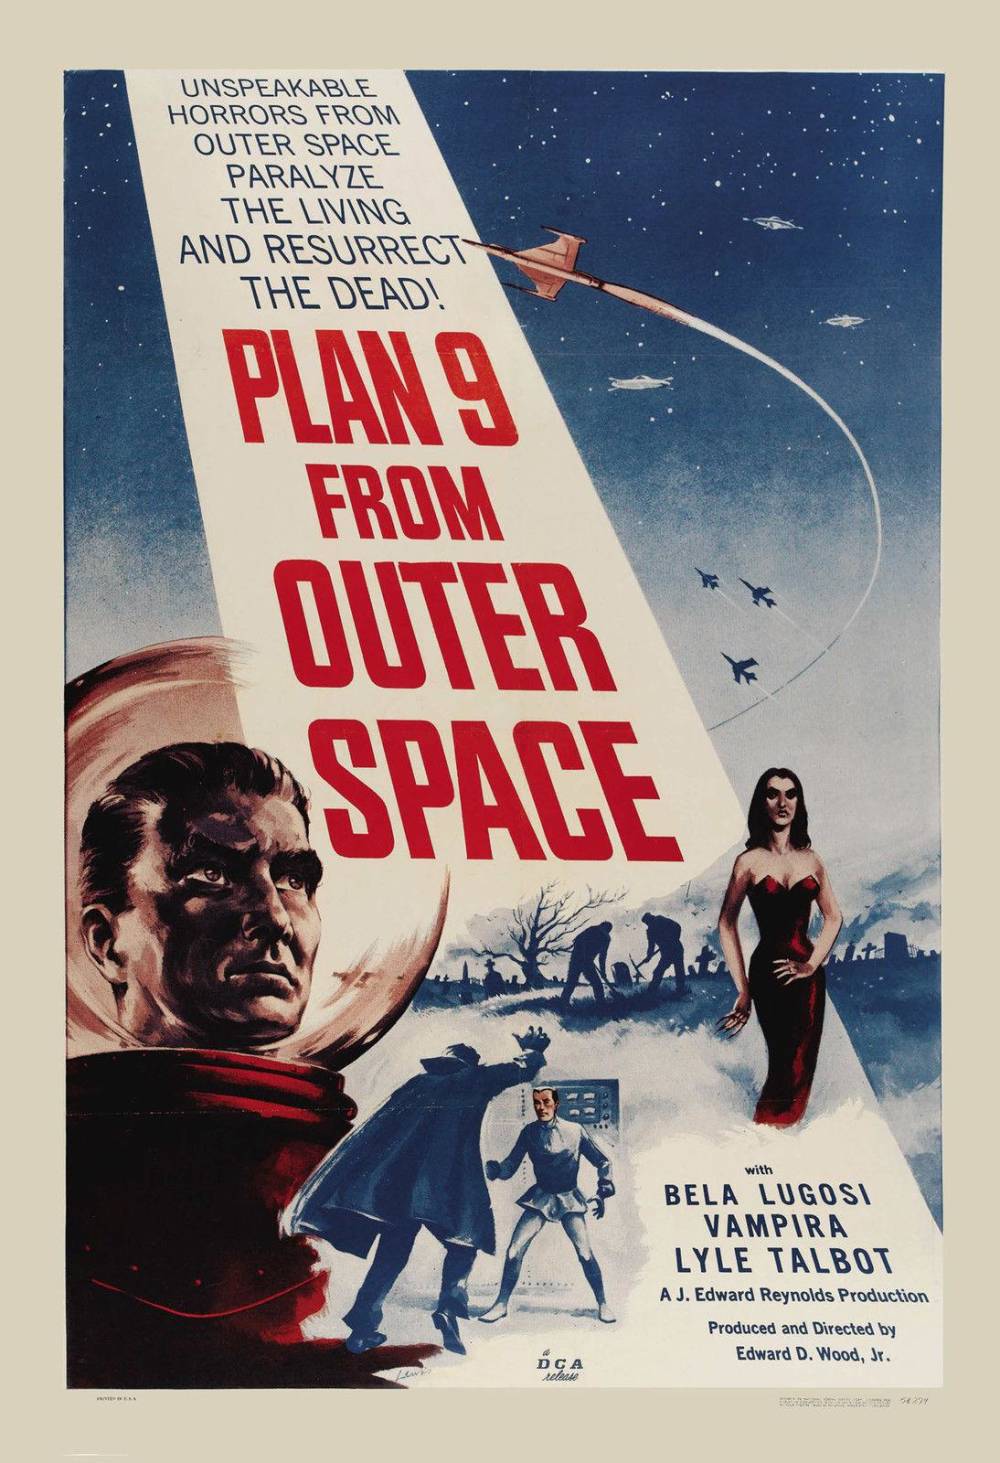  Plan 9 From Outer Space, Poster, 1959  